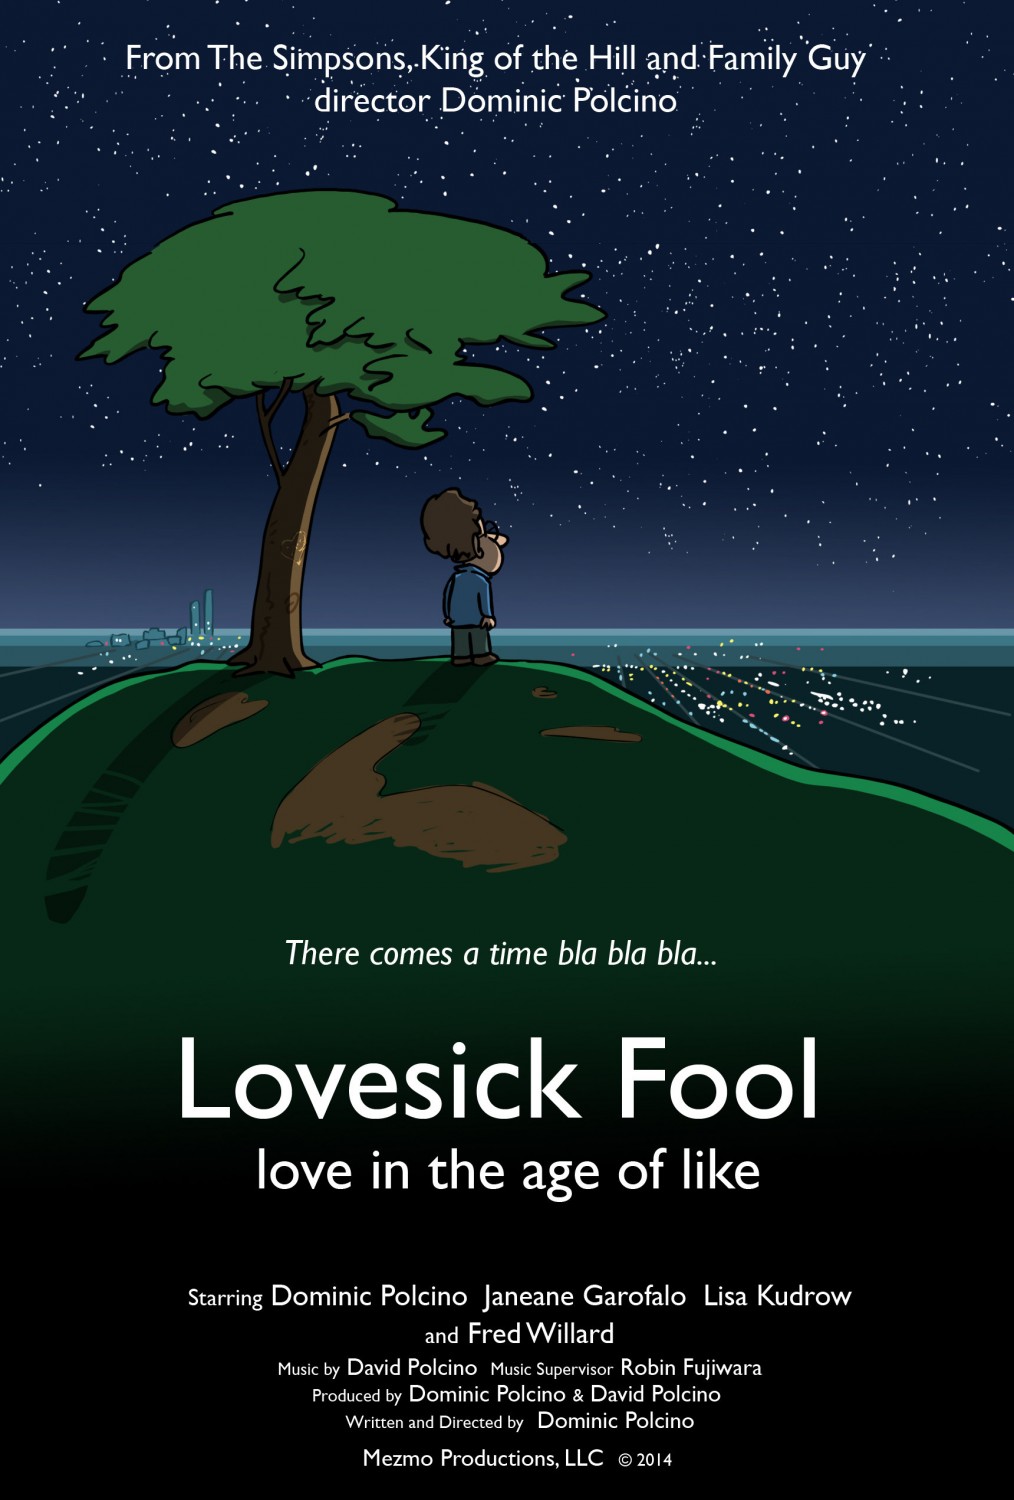 Extra Large Movie Poster Image for Lovesick Fool - Love in the Age of Like